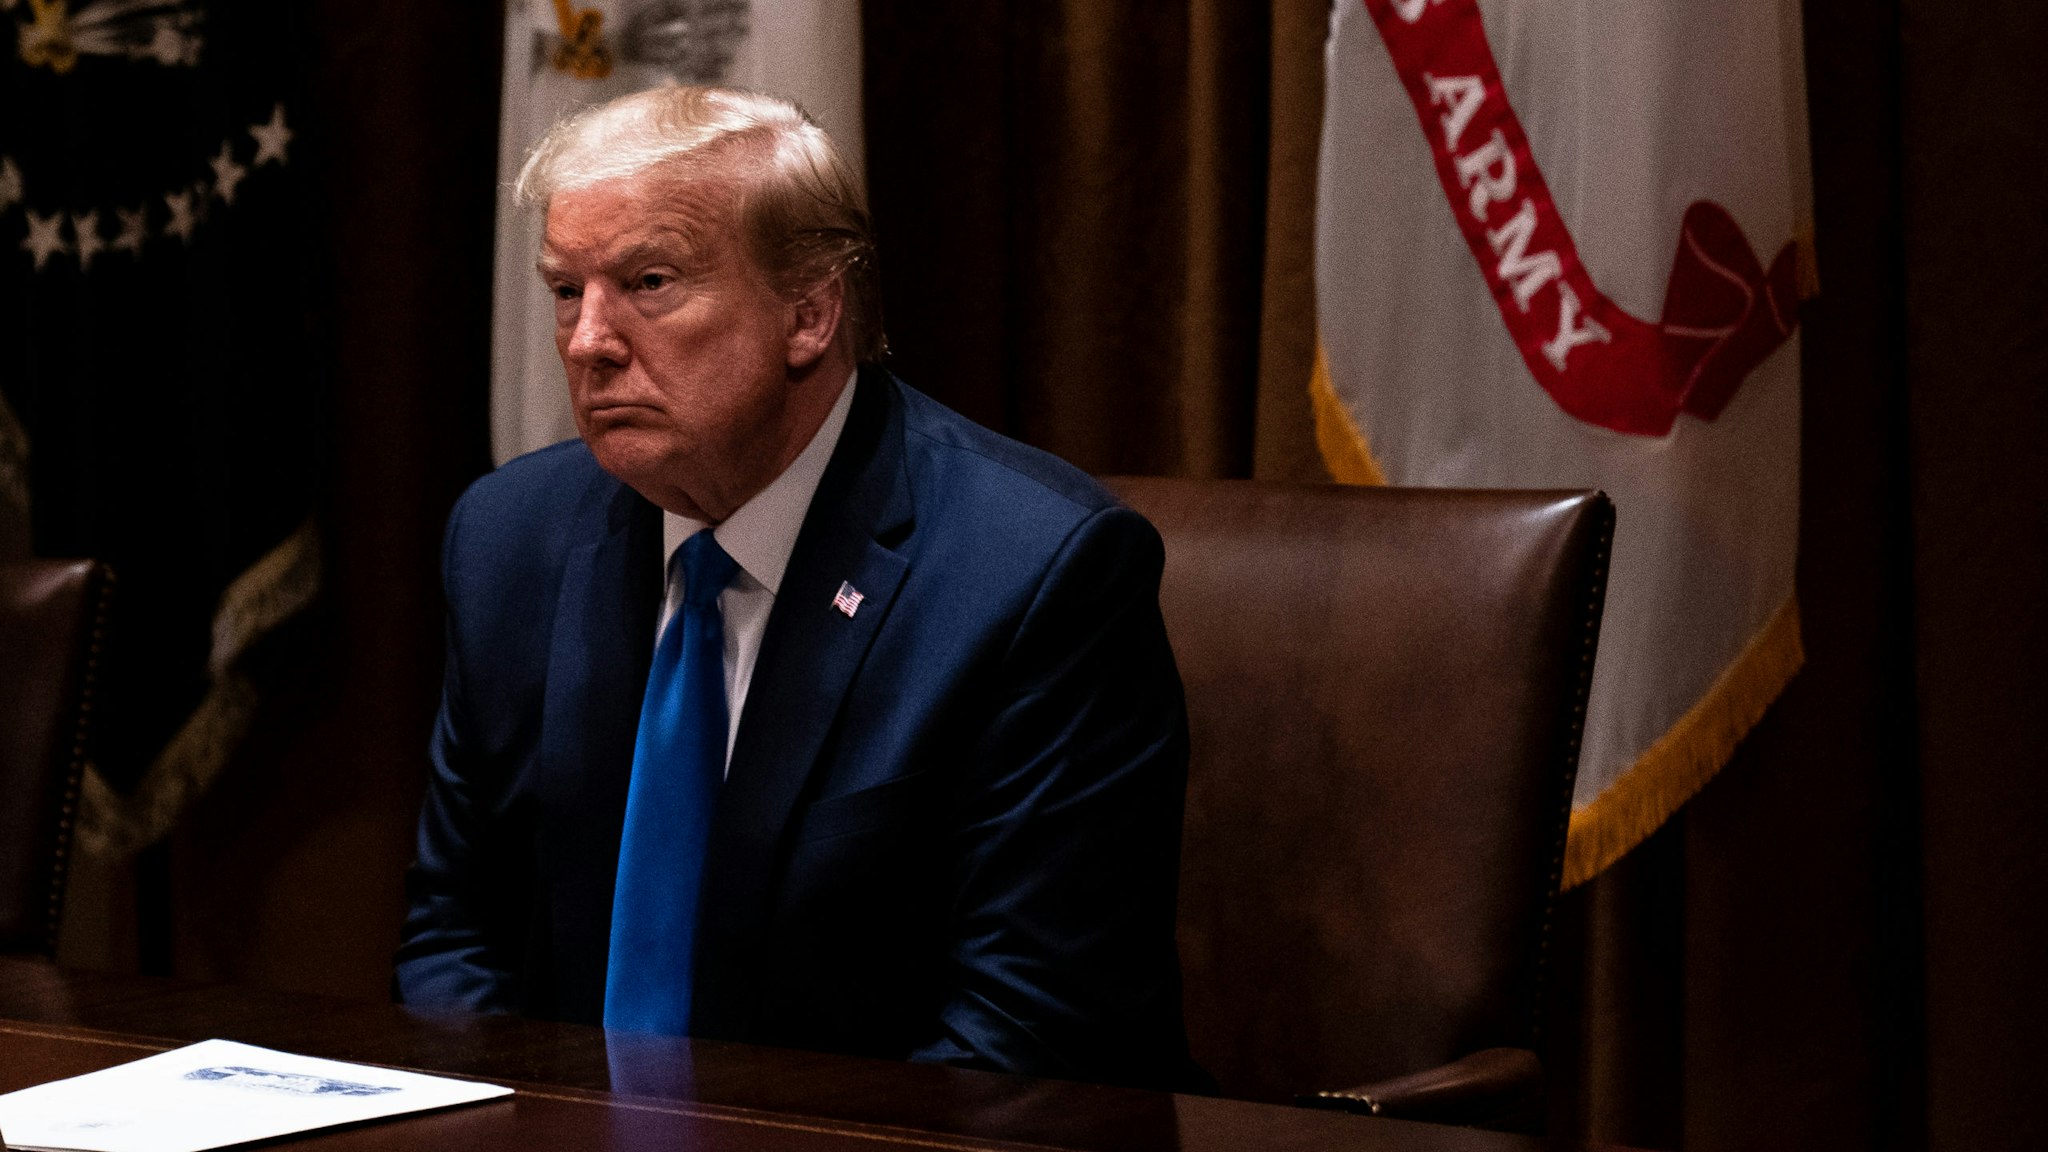 WASHINGTON, DC - MAY 09: President Donald Trump participates in a meeting with Senior Military Leadership and the National Security Team in the Cabinet Room of the White House in Washington DC, May 9th, 2020. (Photo by Anna Moneymaker-Pool/Getty Images)